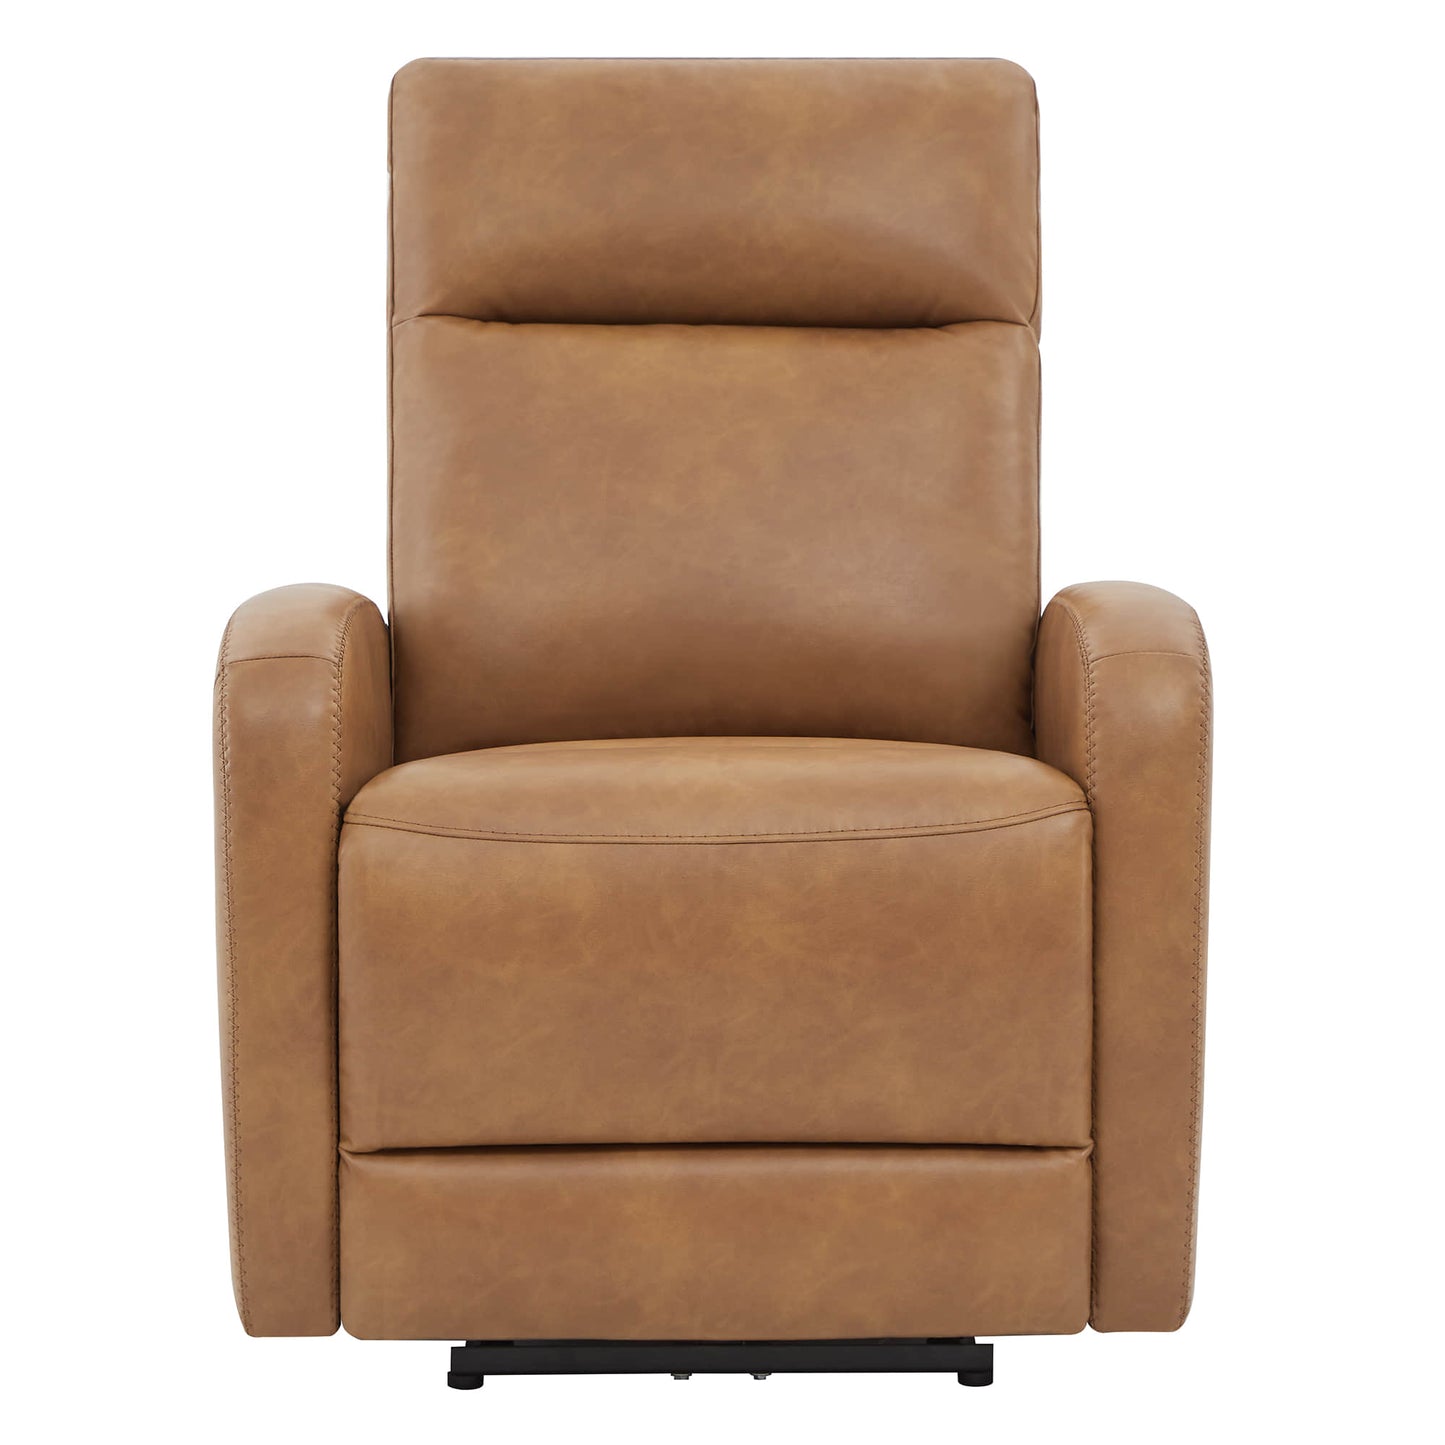 CHITA LIVING-Keni Power Wall Hugger Recliner with Type-C Port-Recliners-Faux leather-Cognac Brown-